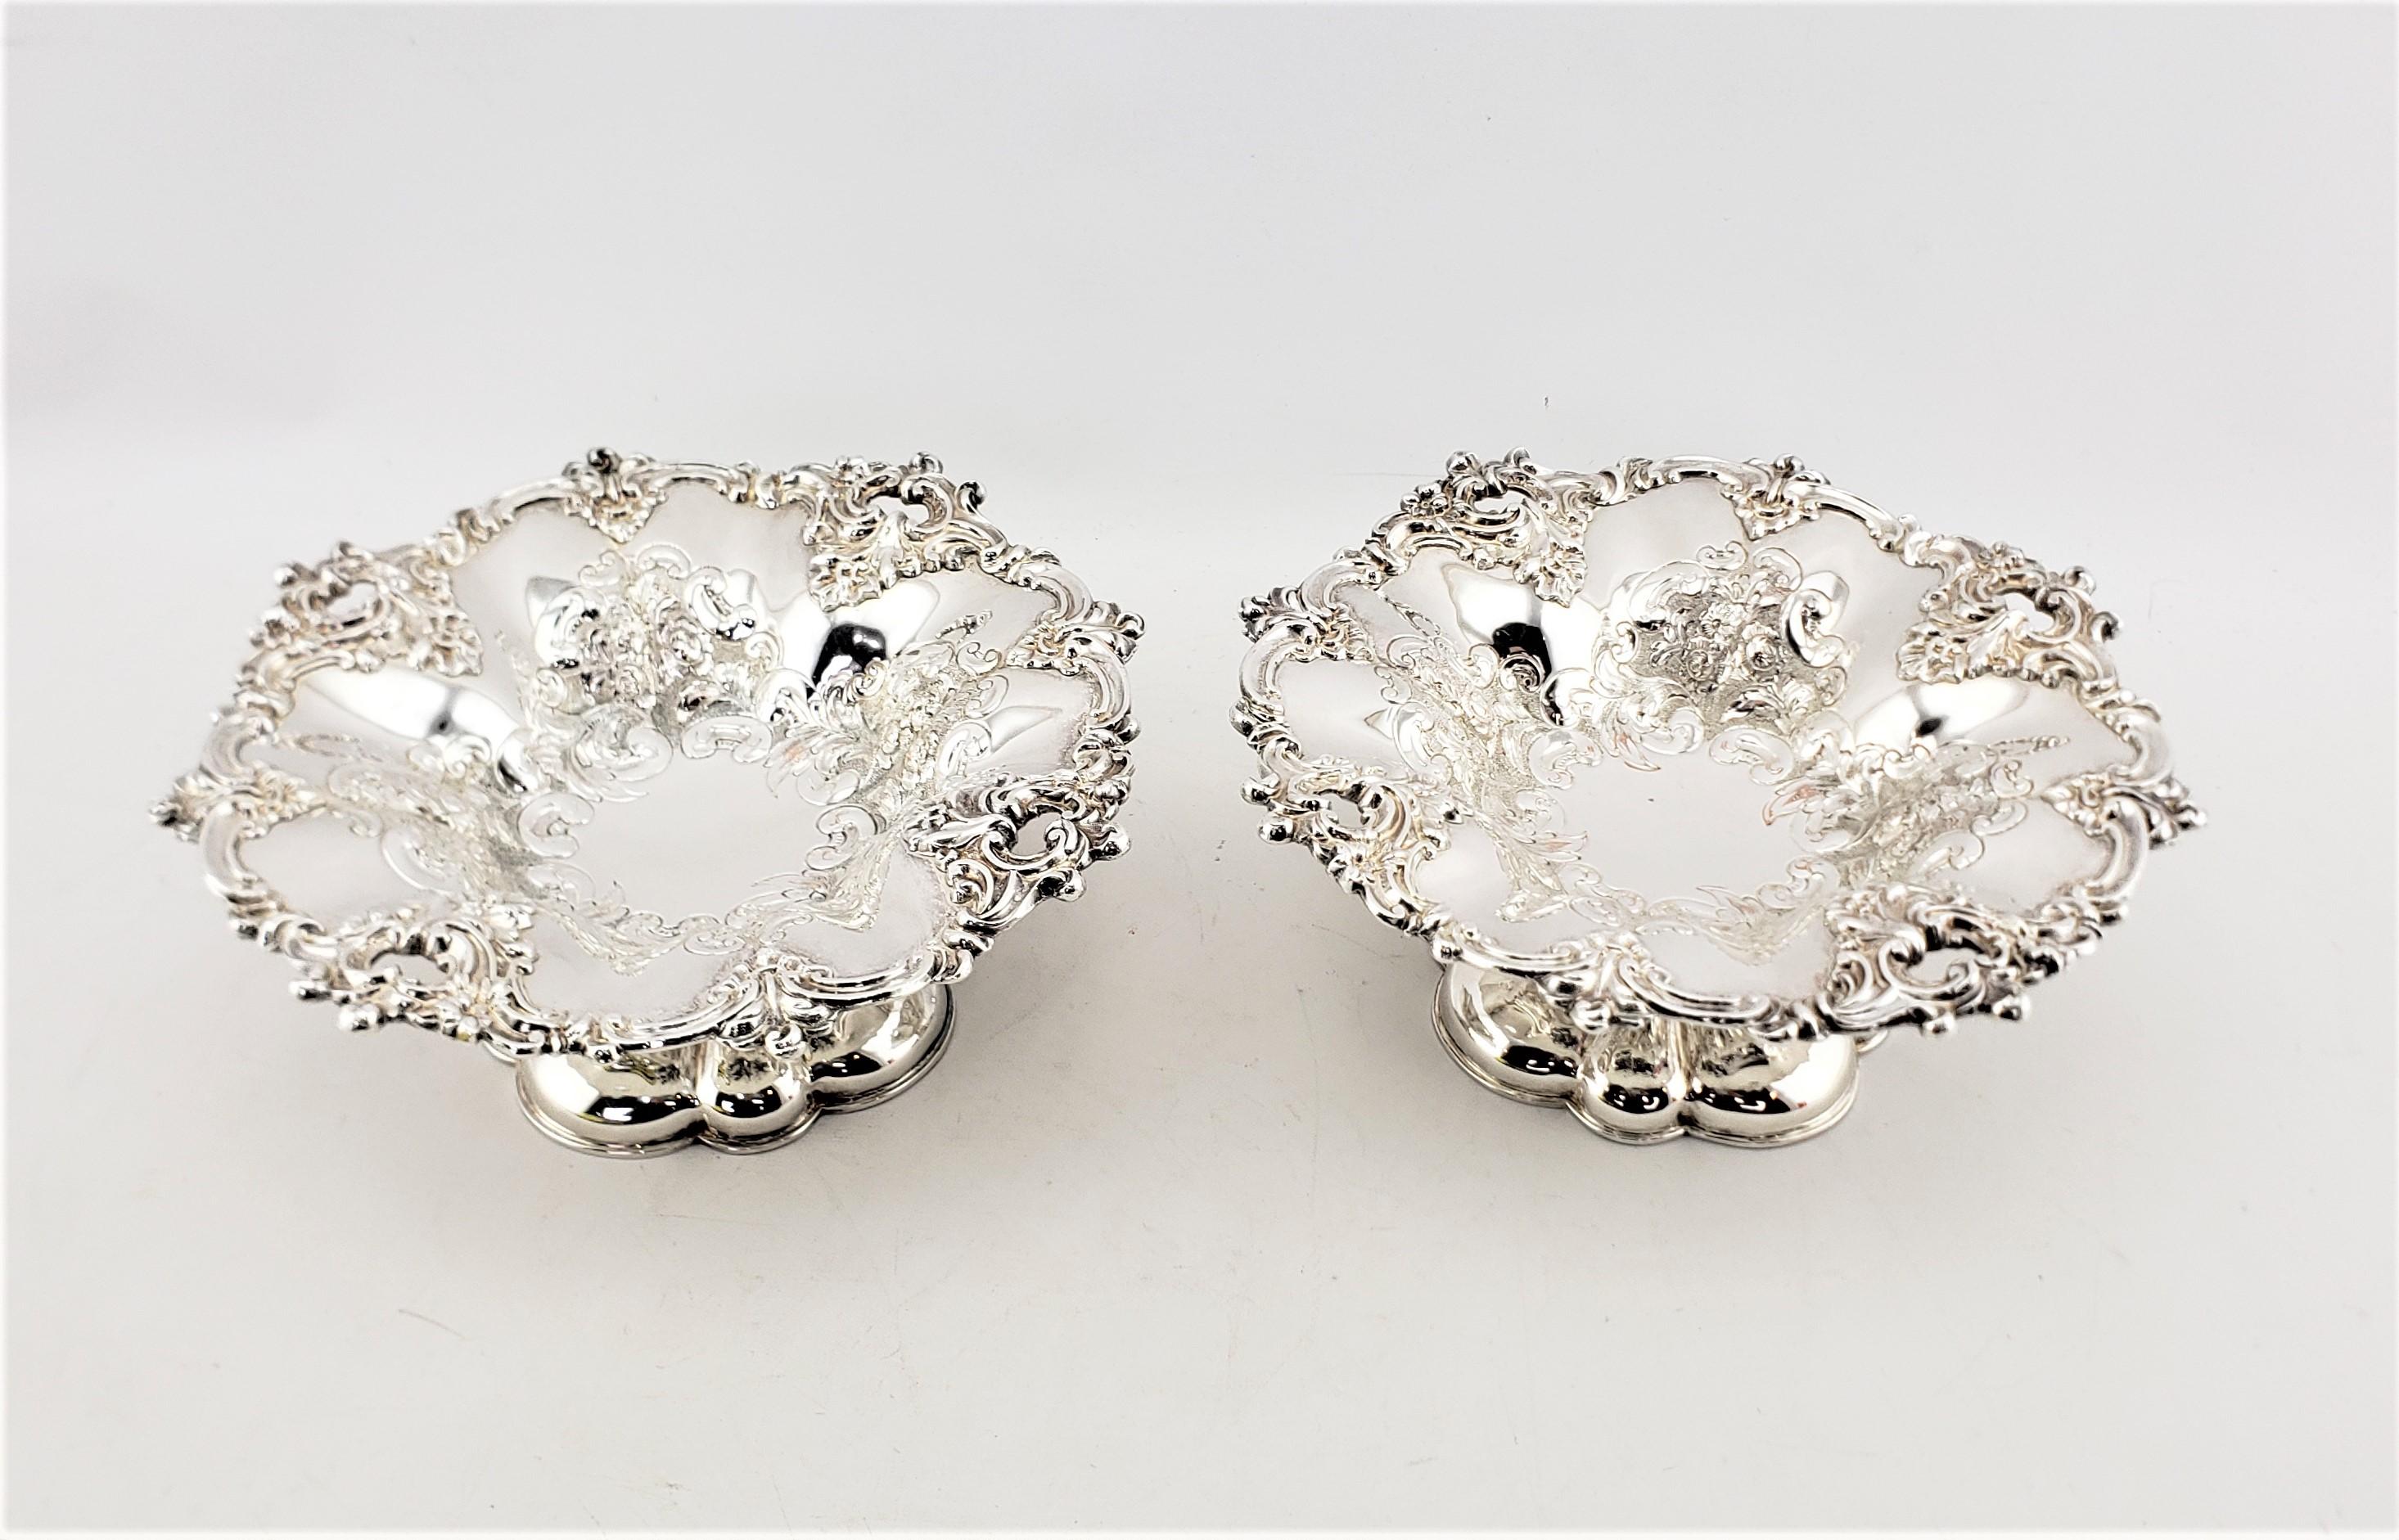 Pair of Antique Barker-Ellis Silver Plated Footed Bowls with Floral Decoration In Good Condition For Sale In Hamilton, Ontario